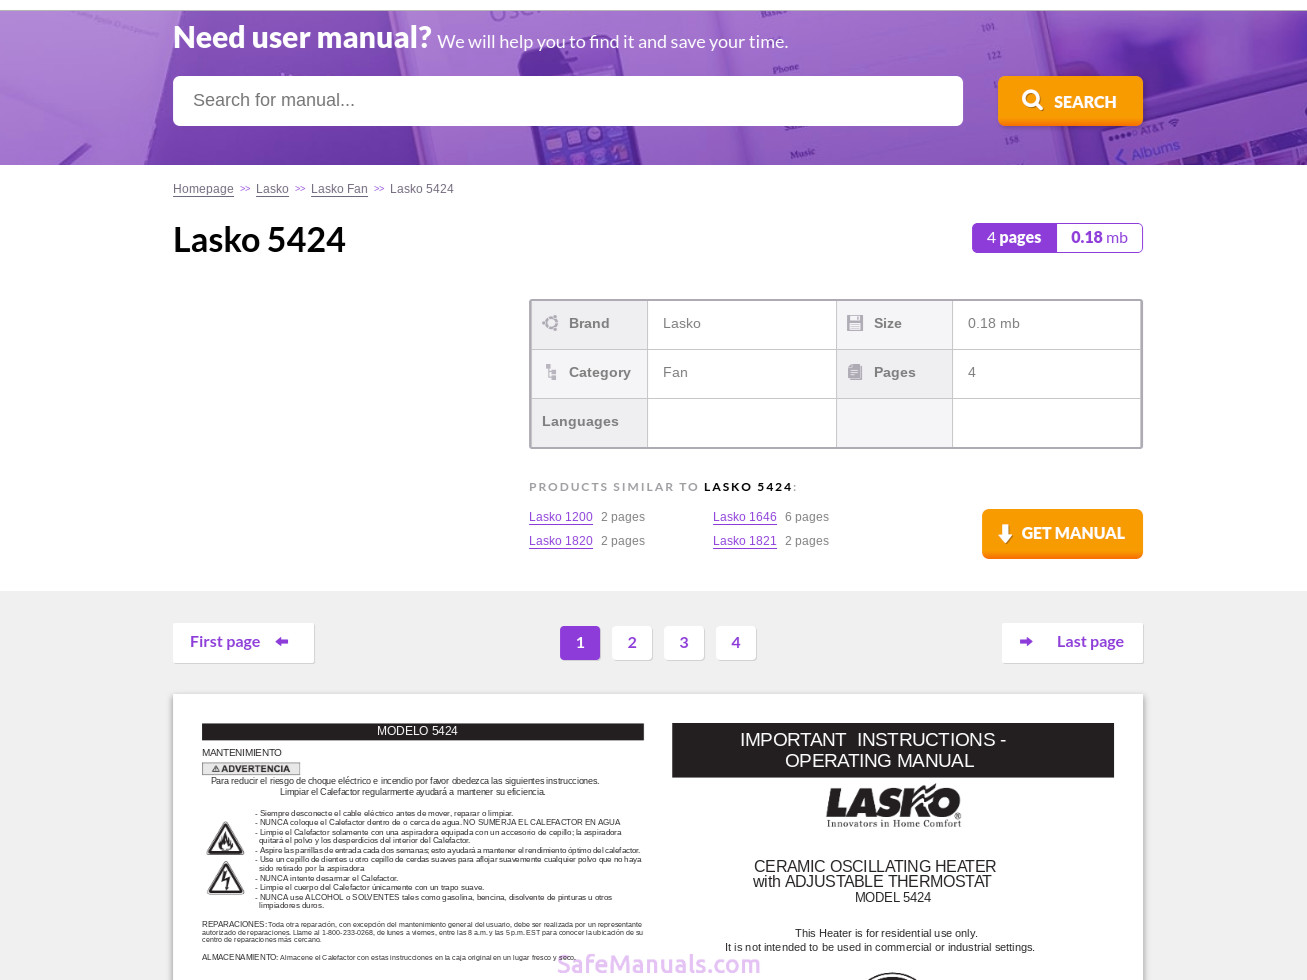 The page for a Lasko 5424 manual on SafeManuals.com; includes both the embedded manual, and a PDF download link.